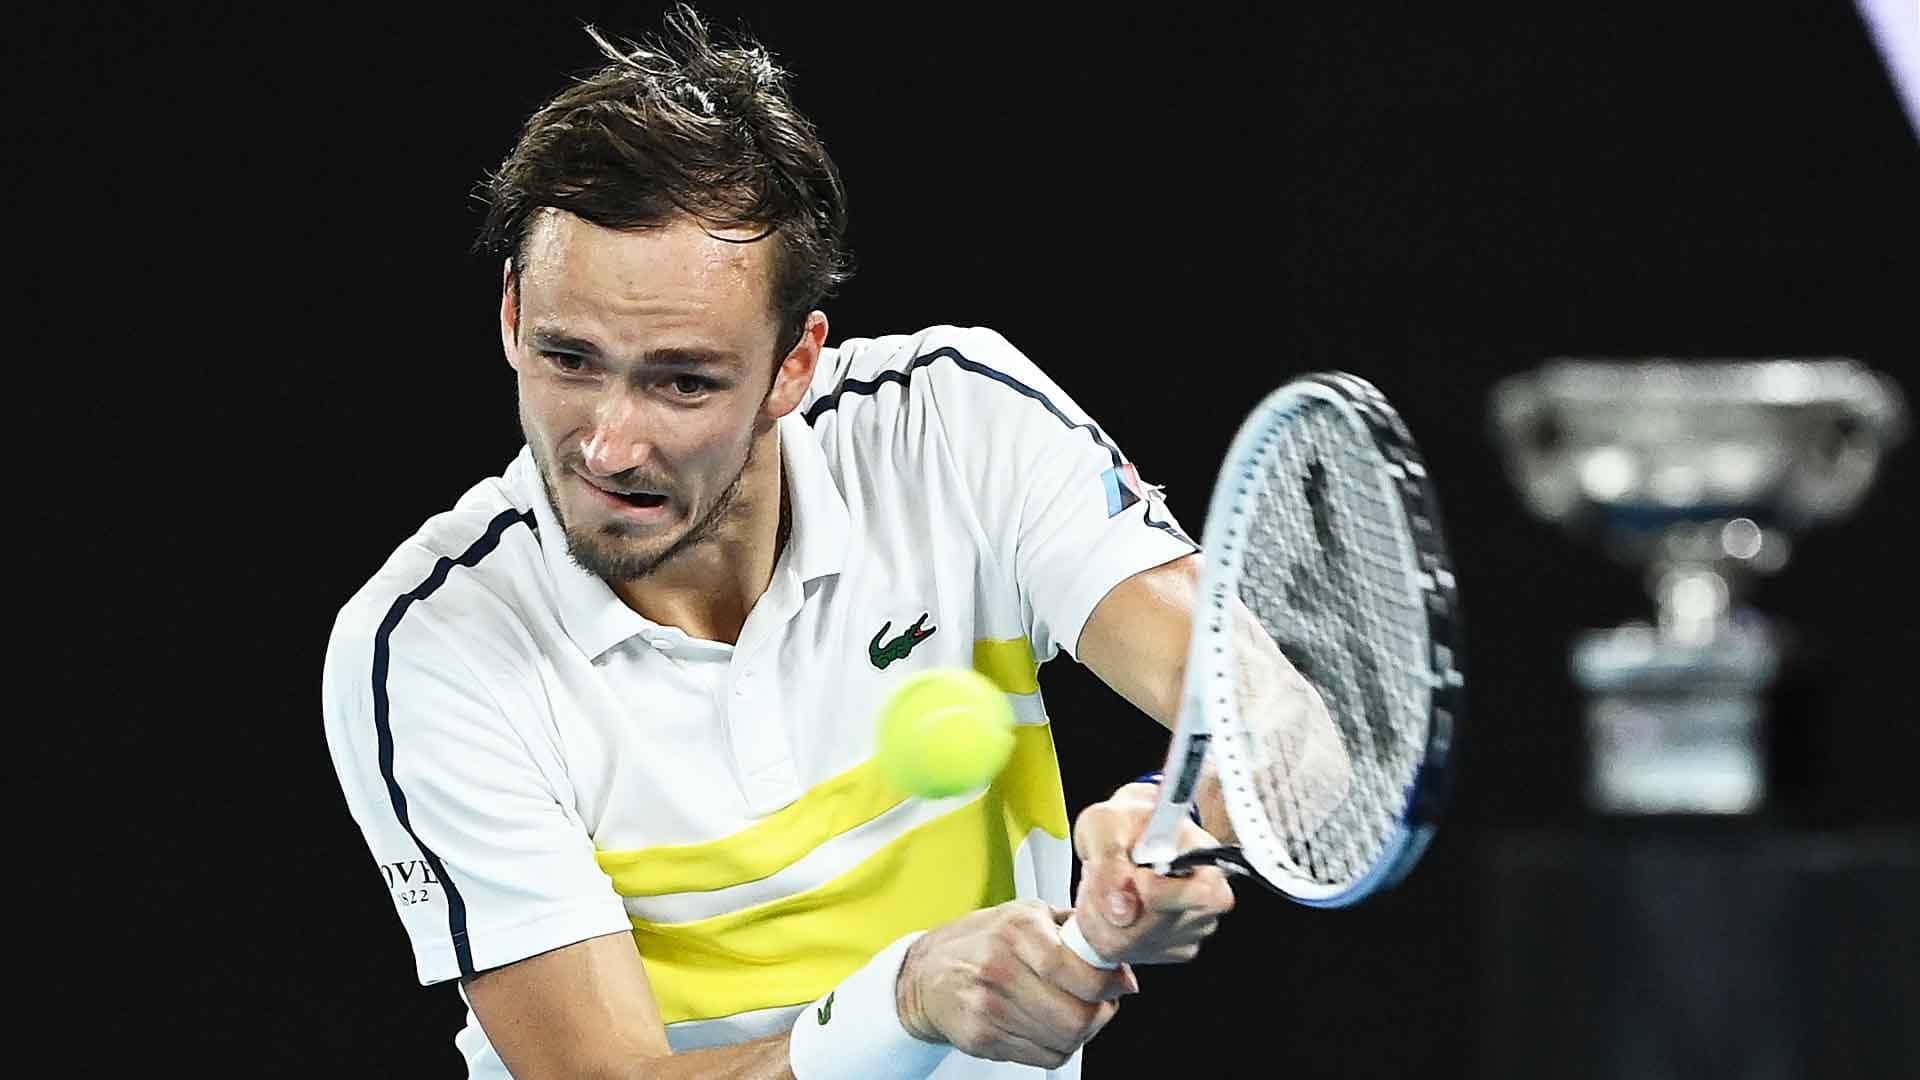 <a href='https://www.atptour.com/en/players/daniil-medvedev/mm58/overview'>Daniil Medvedev</a> is aiming to capture his first Grand Slam title at the <a href='https://www.atptour.com/en/tournaments/australian-open/580/overview'>Australian Open</a>.